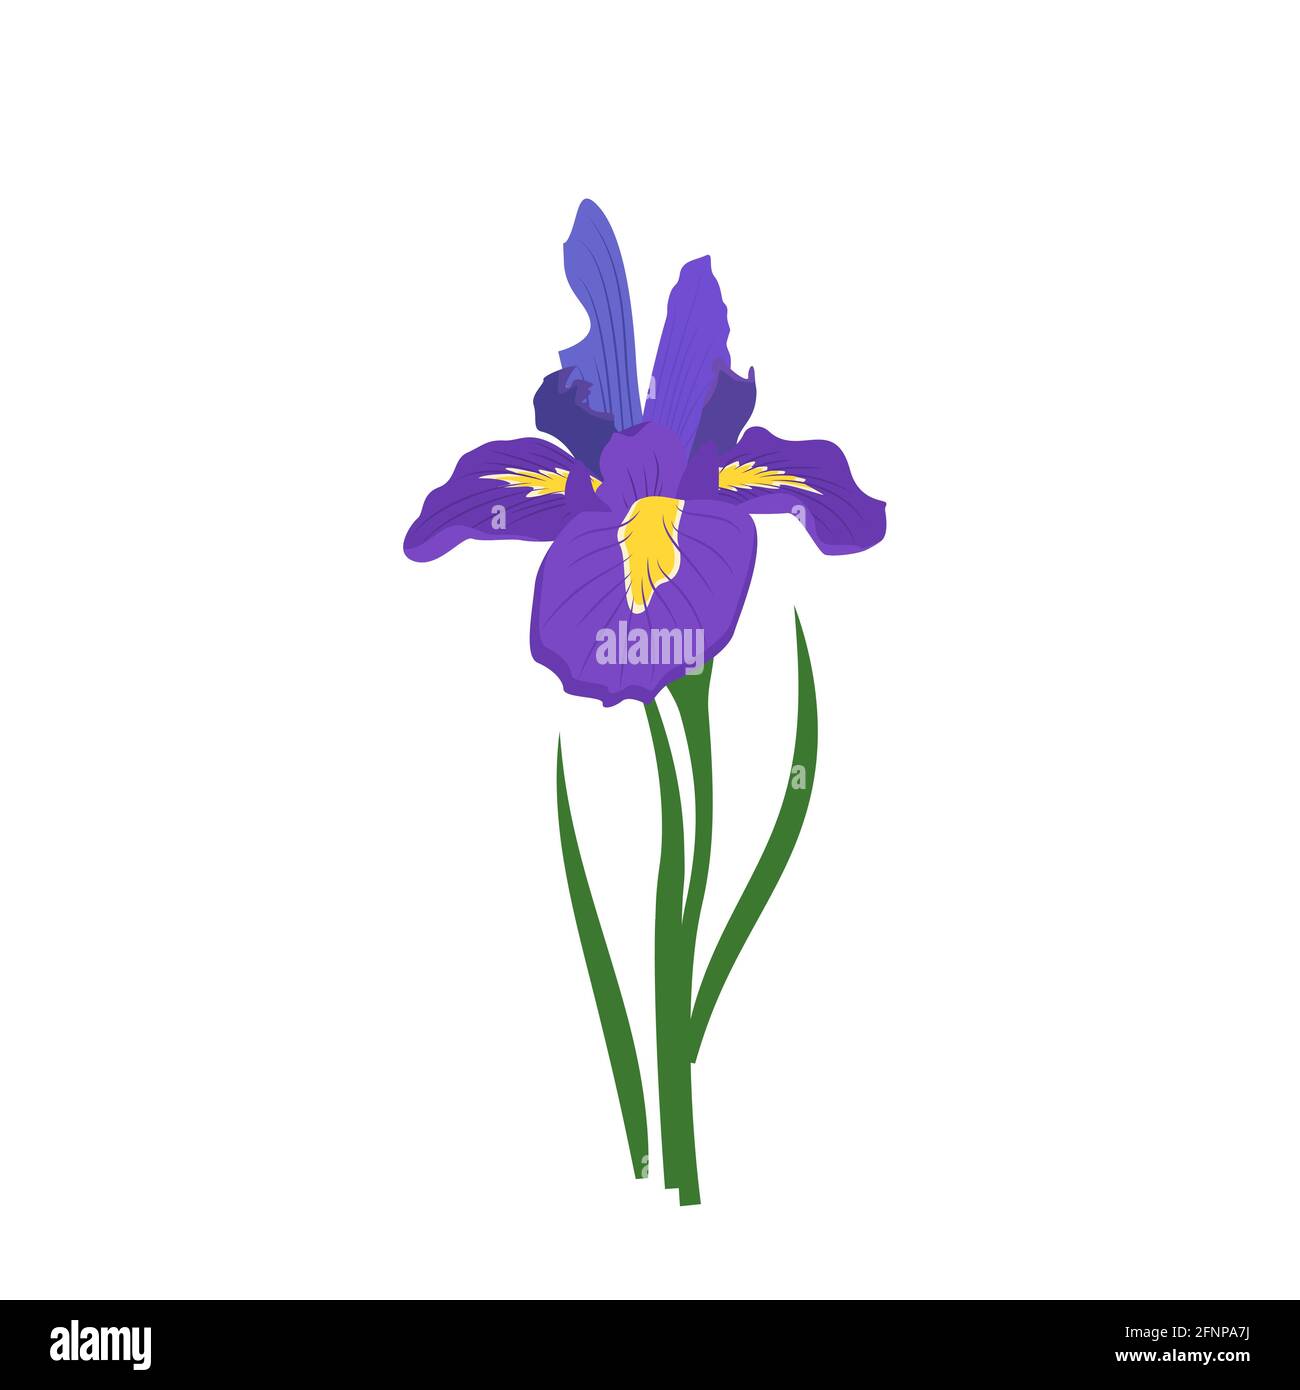 Purple iris flower with bright yellow elements on the petals. Spring or summer plant for wedding, gift or design Stock Vector